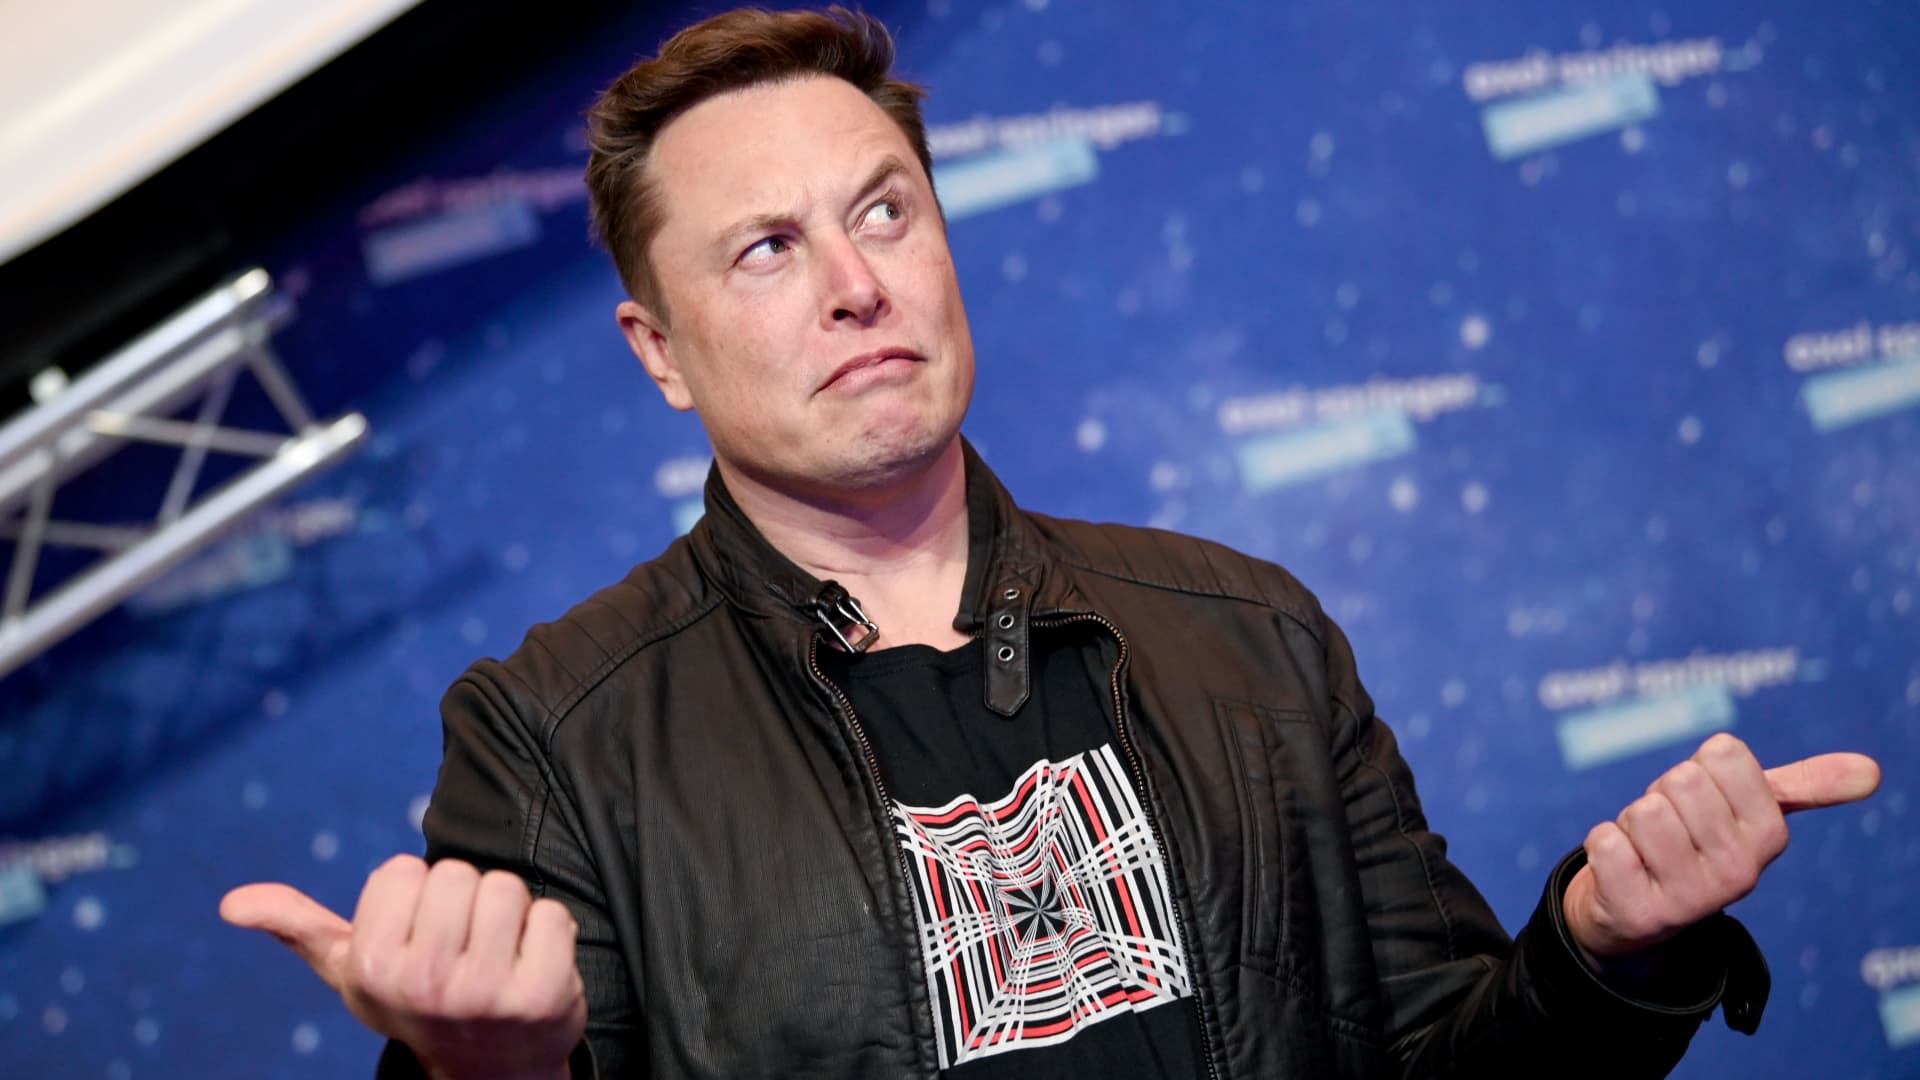 SpaceX employees denounce CEO Musk as 'distraction' in letter